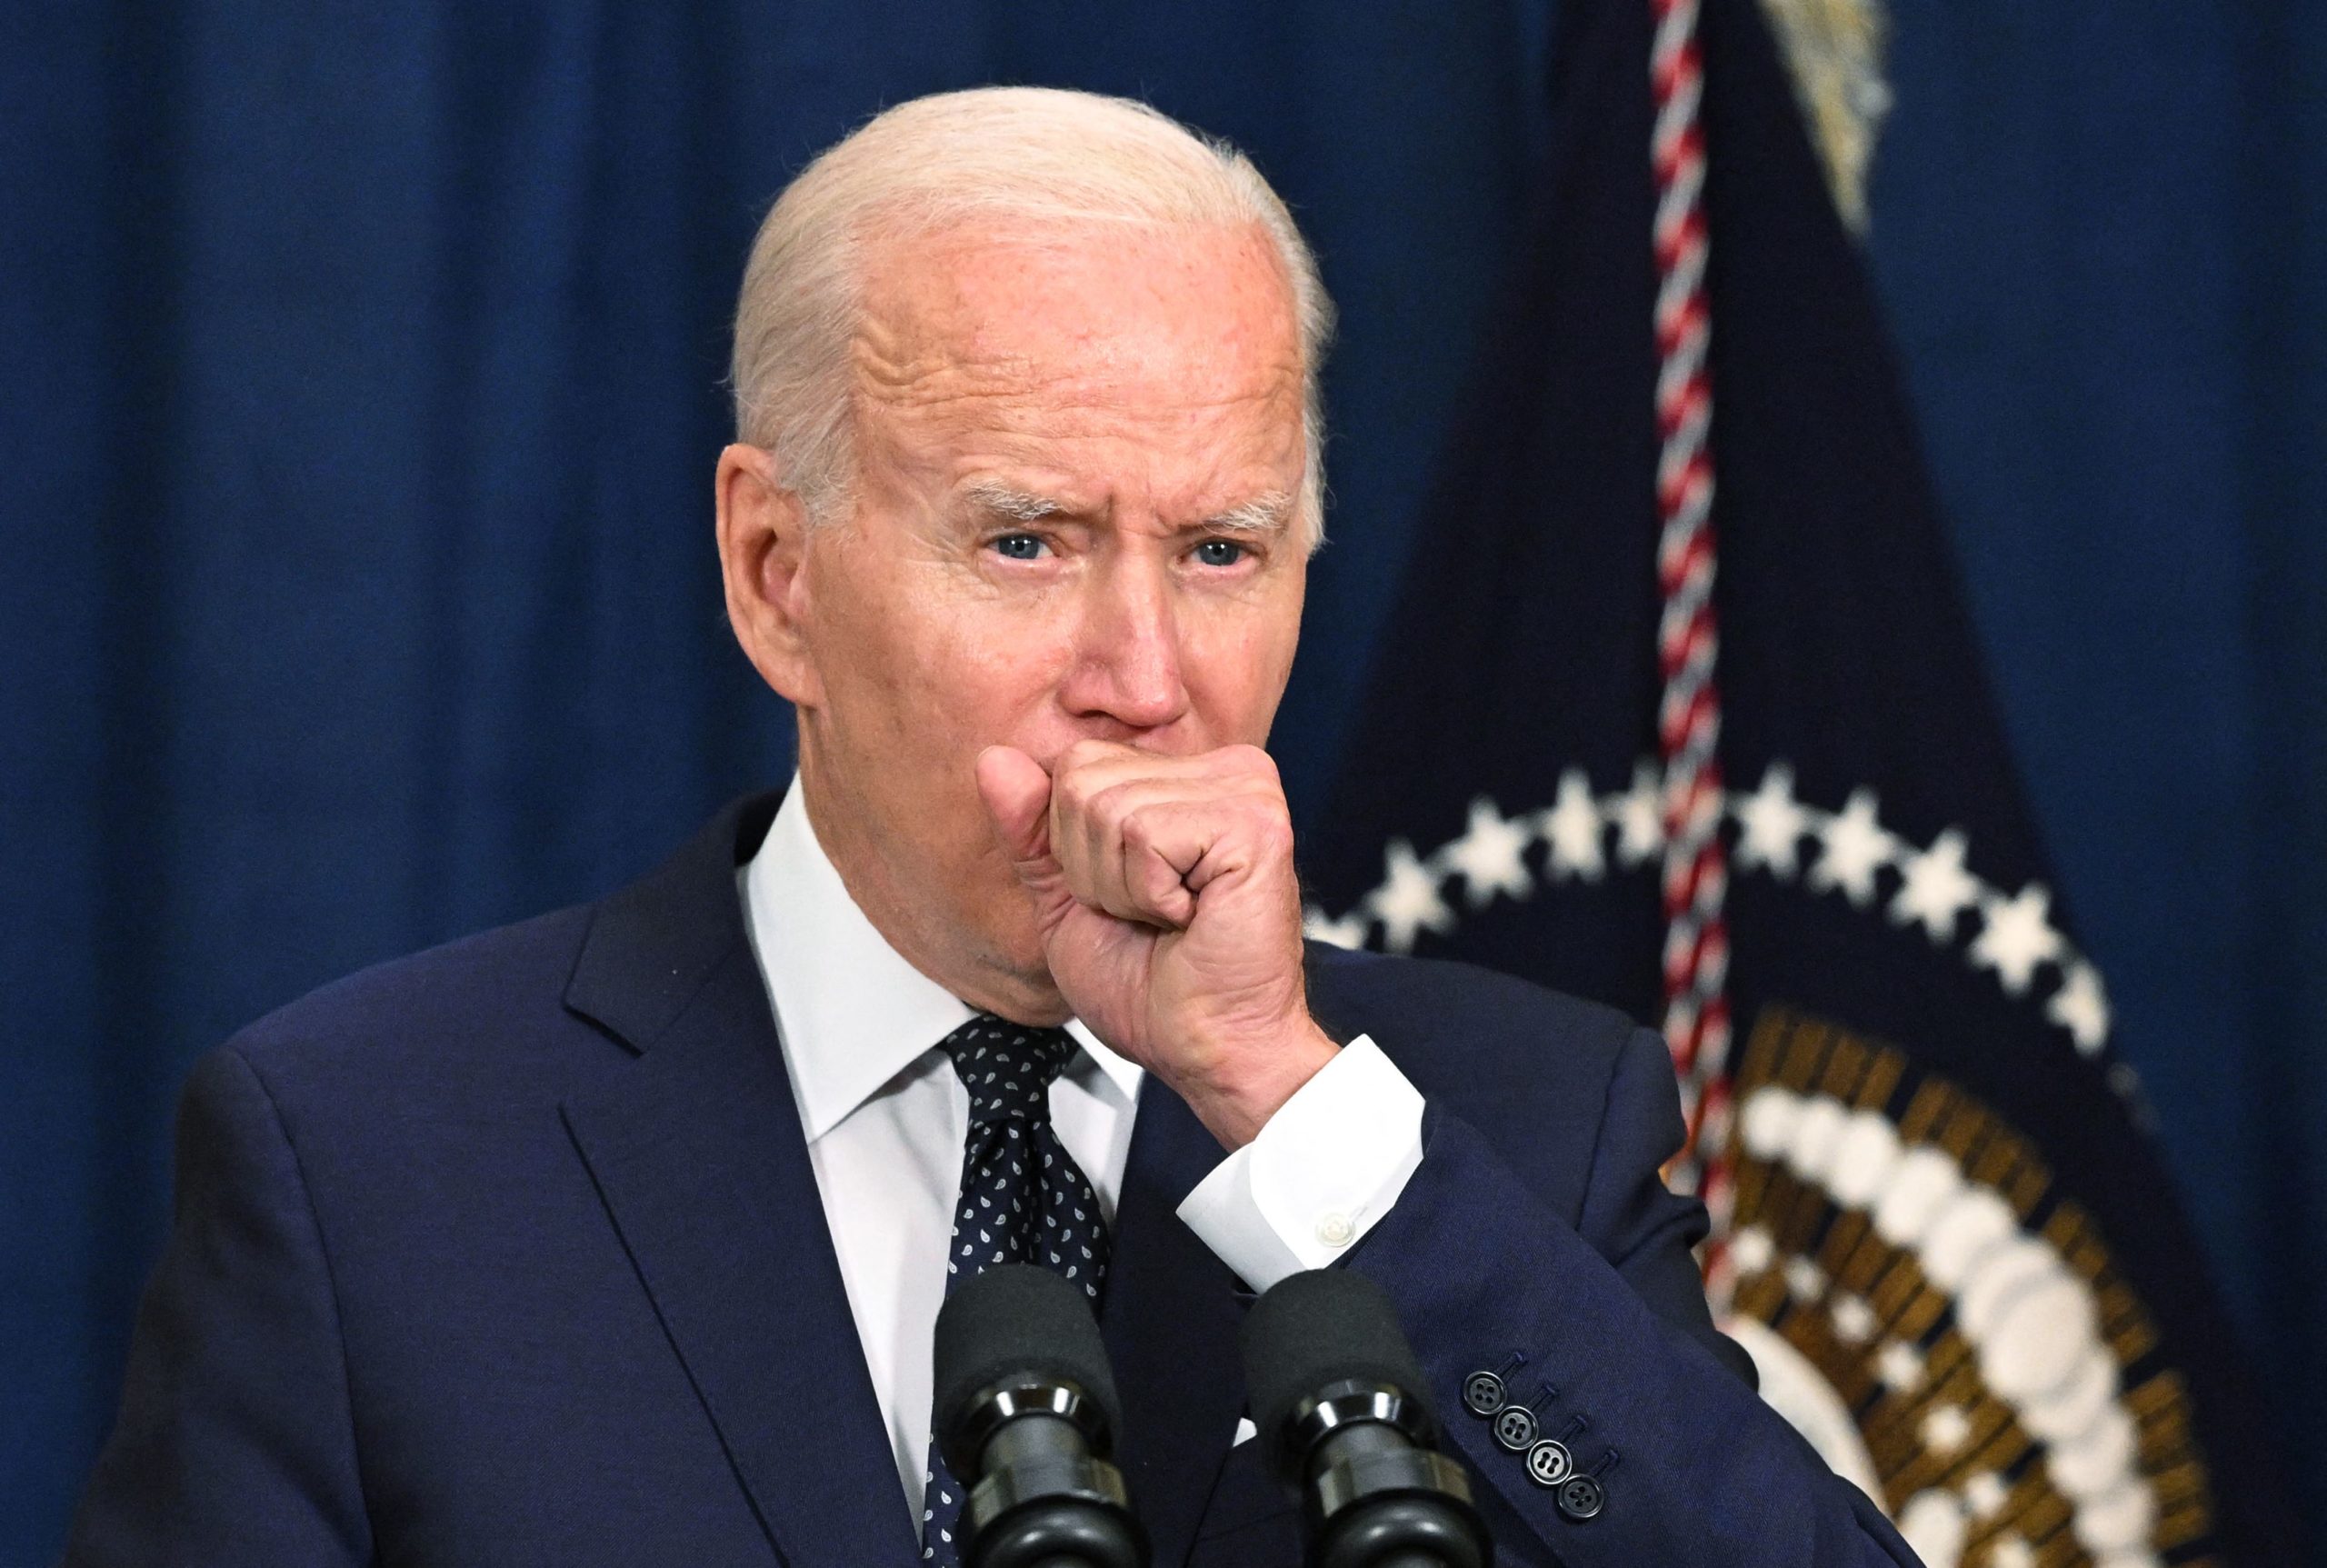 A July 15 photo shows President Joe Biden coughing as he speaks to the traveling press after taking part in a working session with Saudi Arabia's Crown Prince Mohammed bin Salman last week in Jeddah, Saudi Arabia.